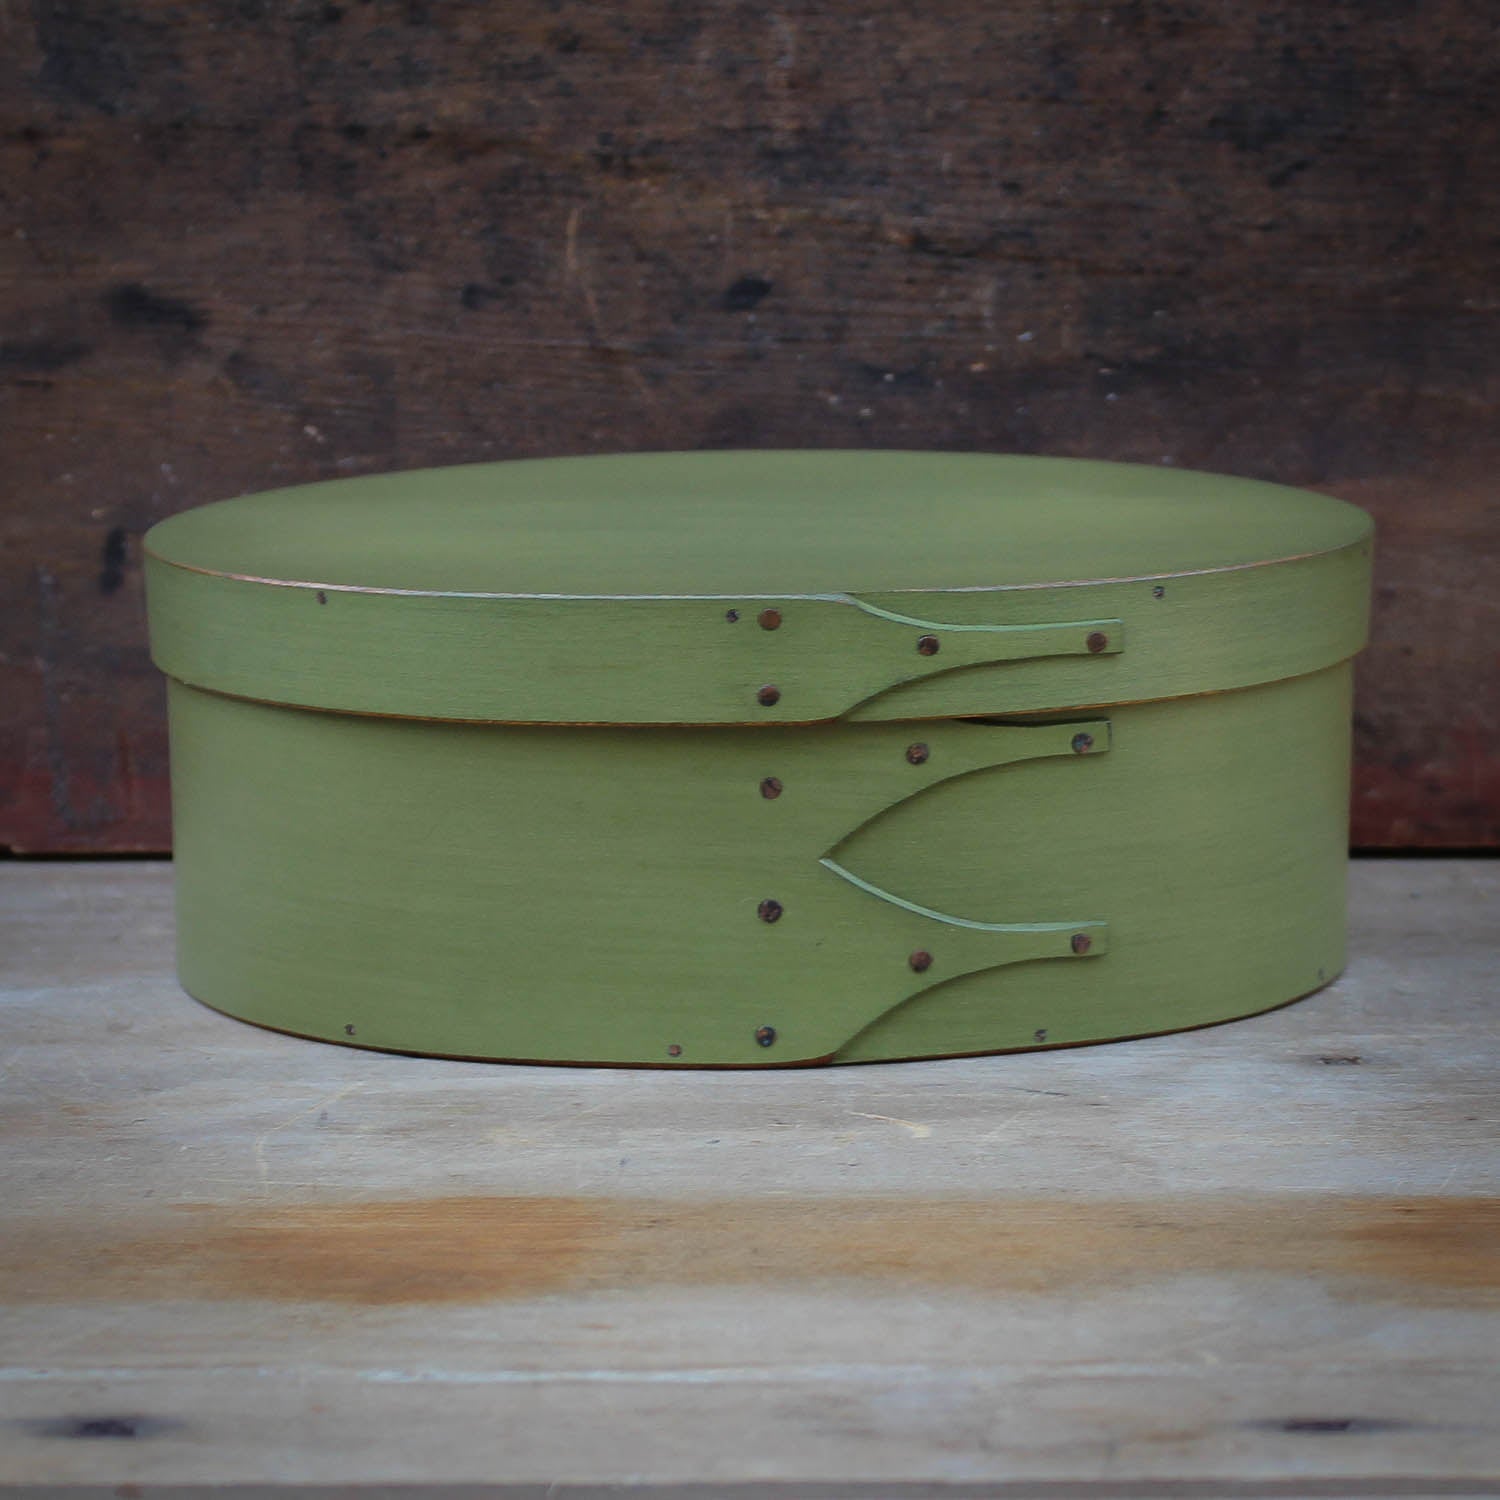 Shaker Oval Box, Size #3, LeHays Shaker Boxes, Handcrafted in Maine.  Green Milk Paint Finish, Front View